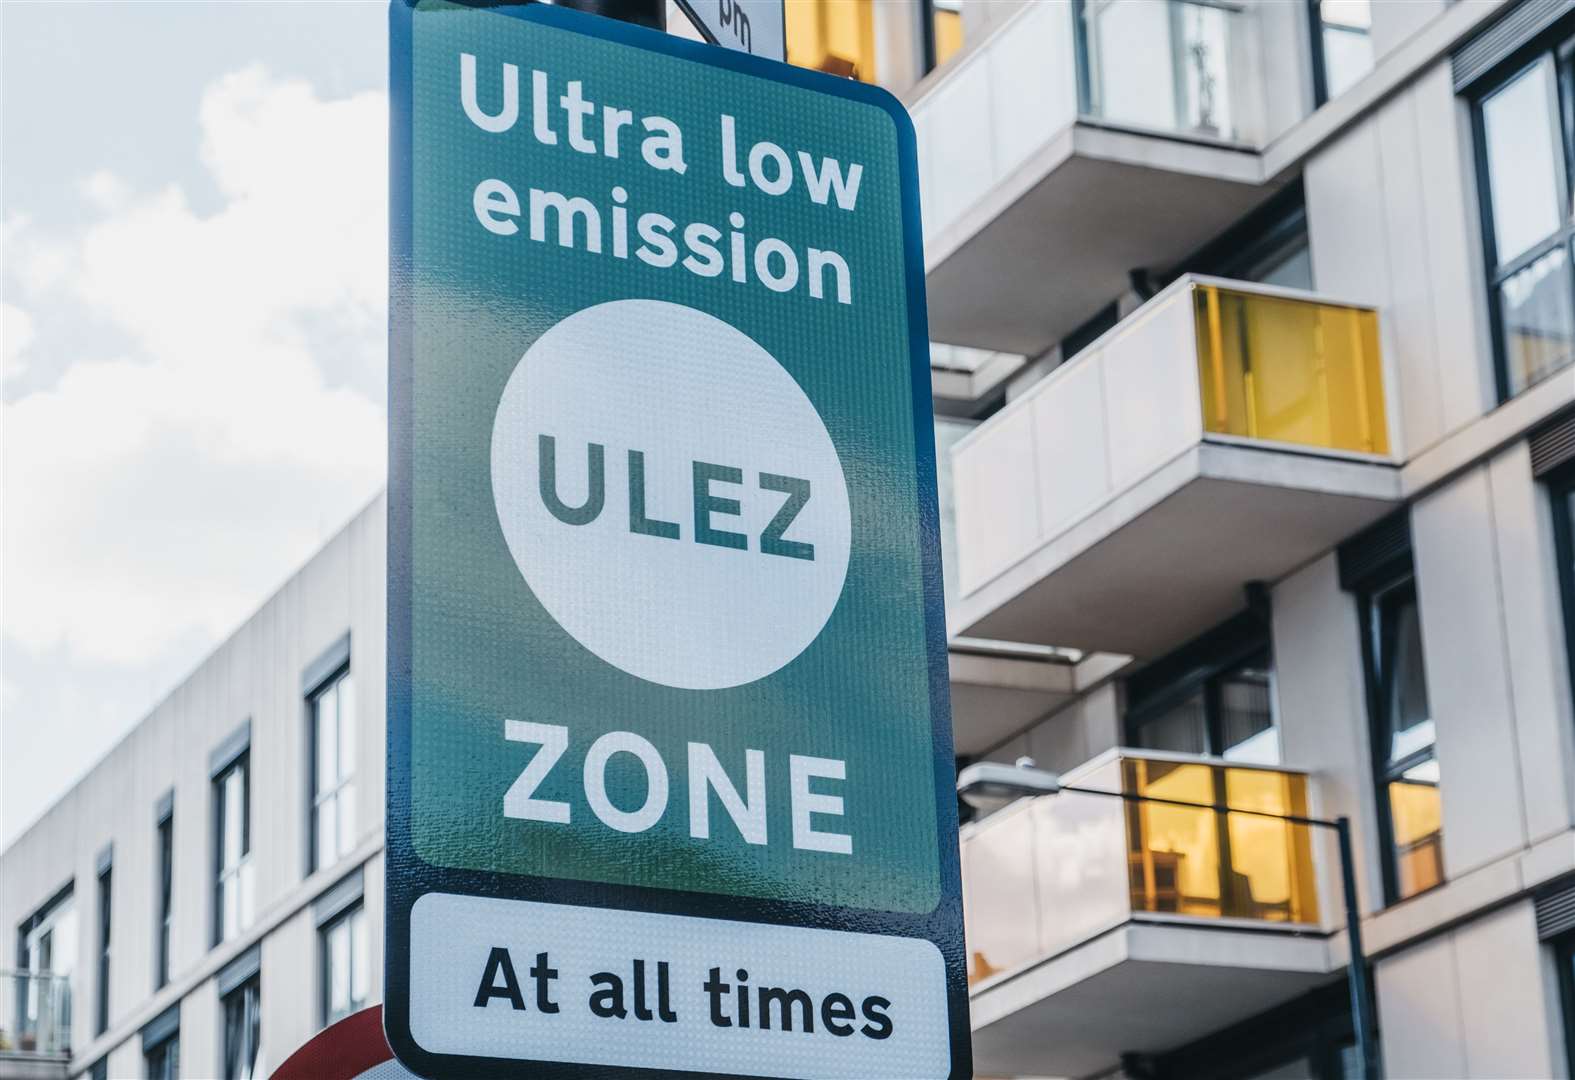 The Ulez imposes a £12.50 daily charge for many motorists